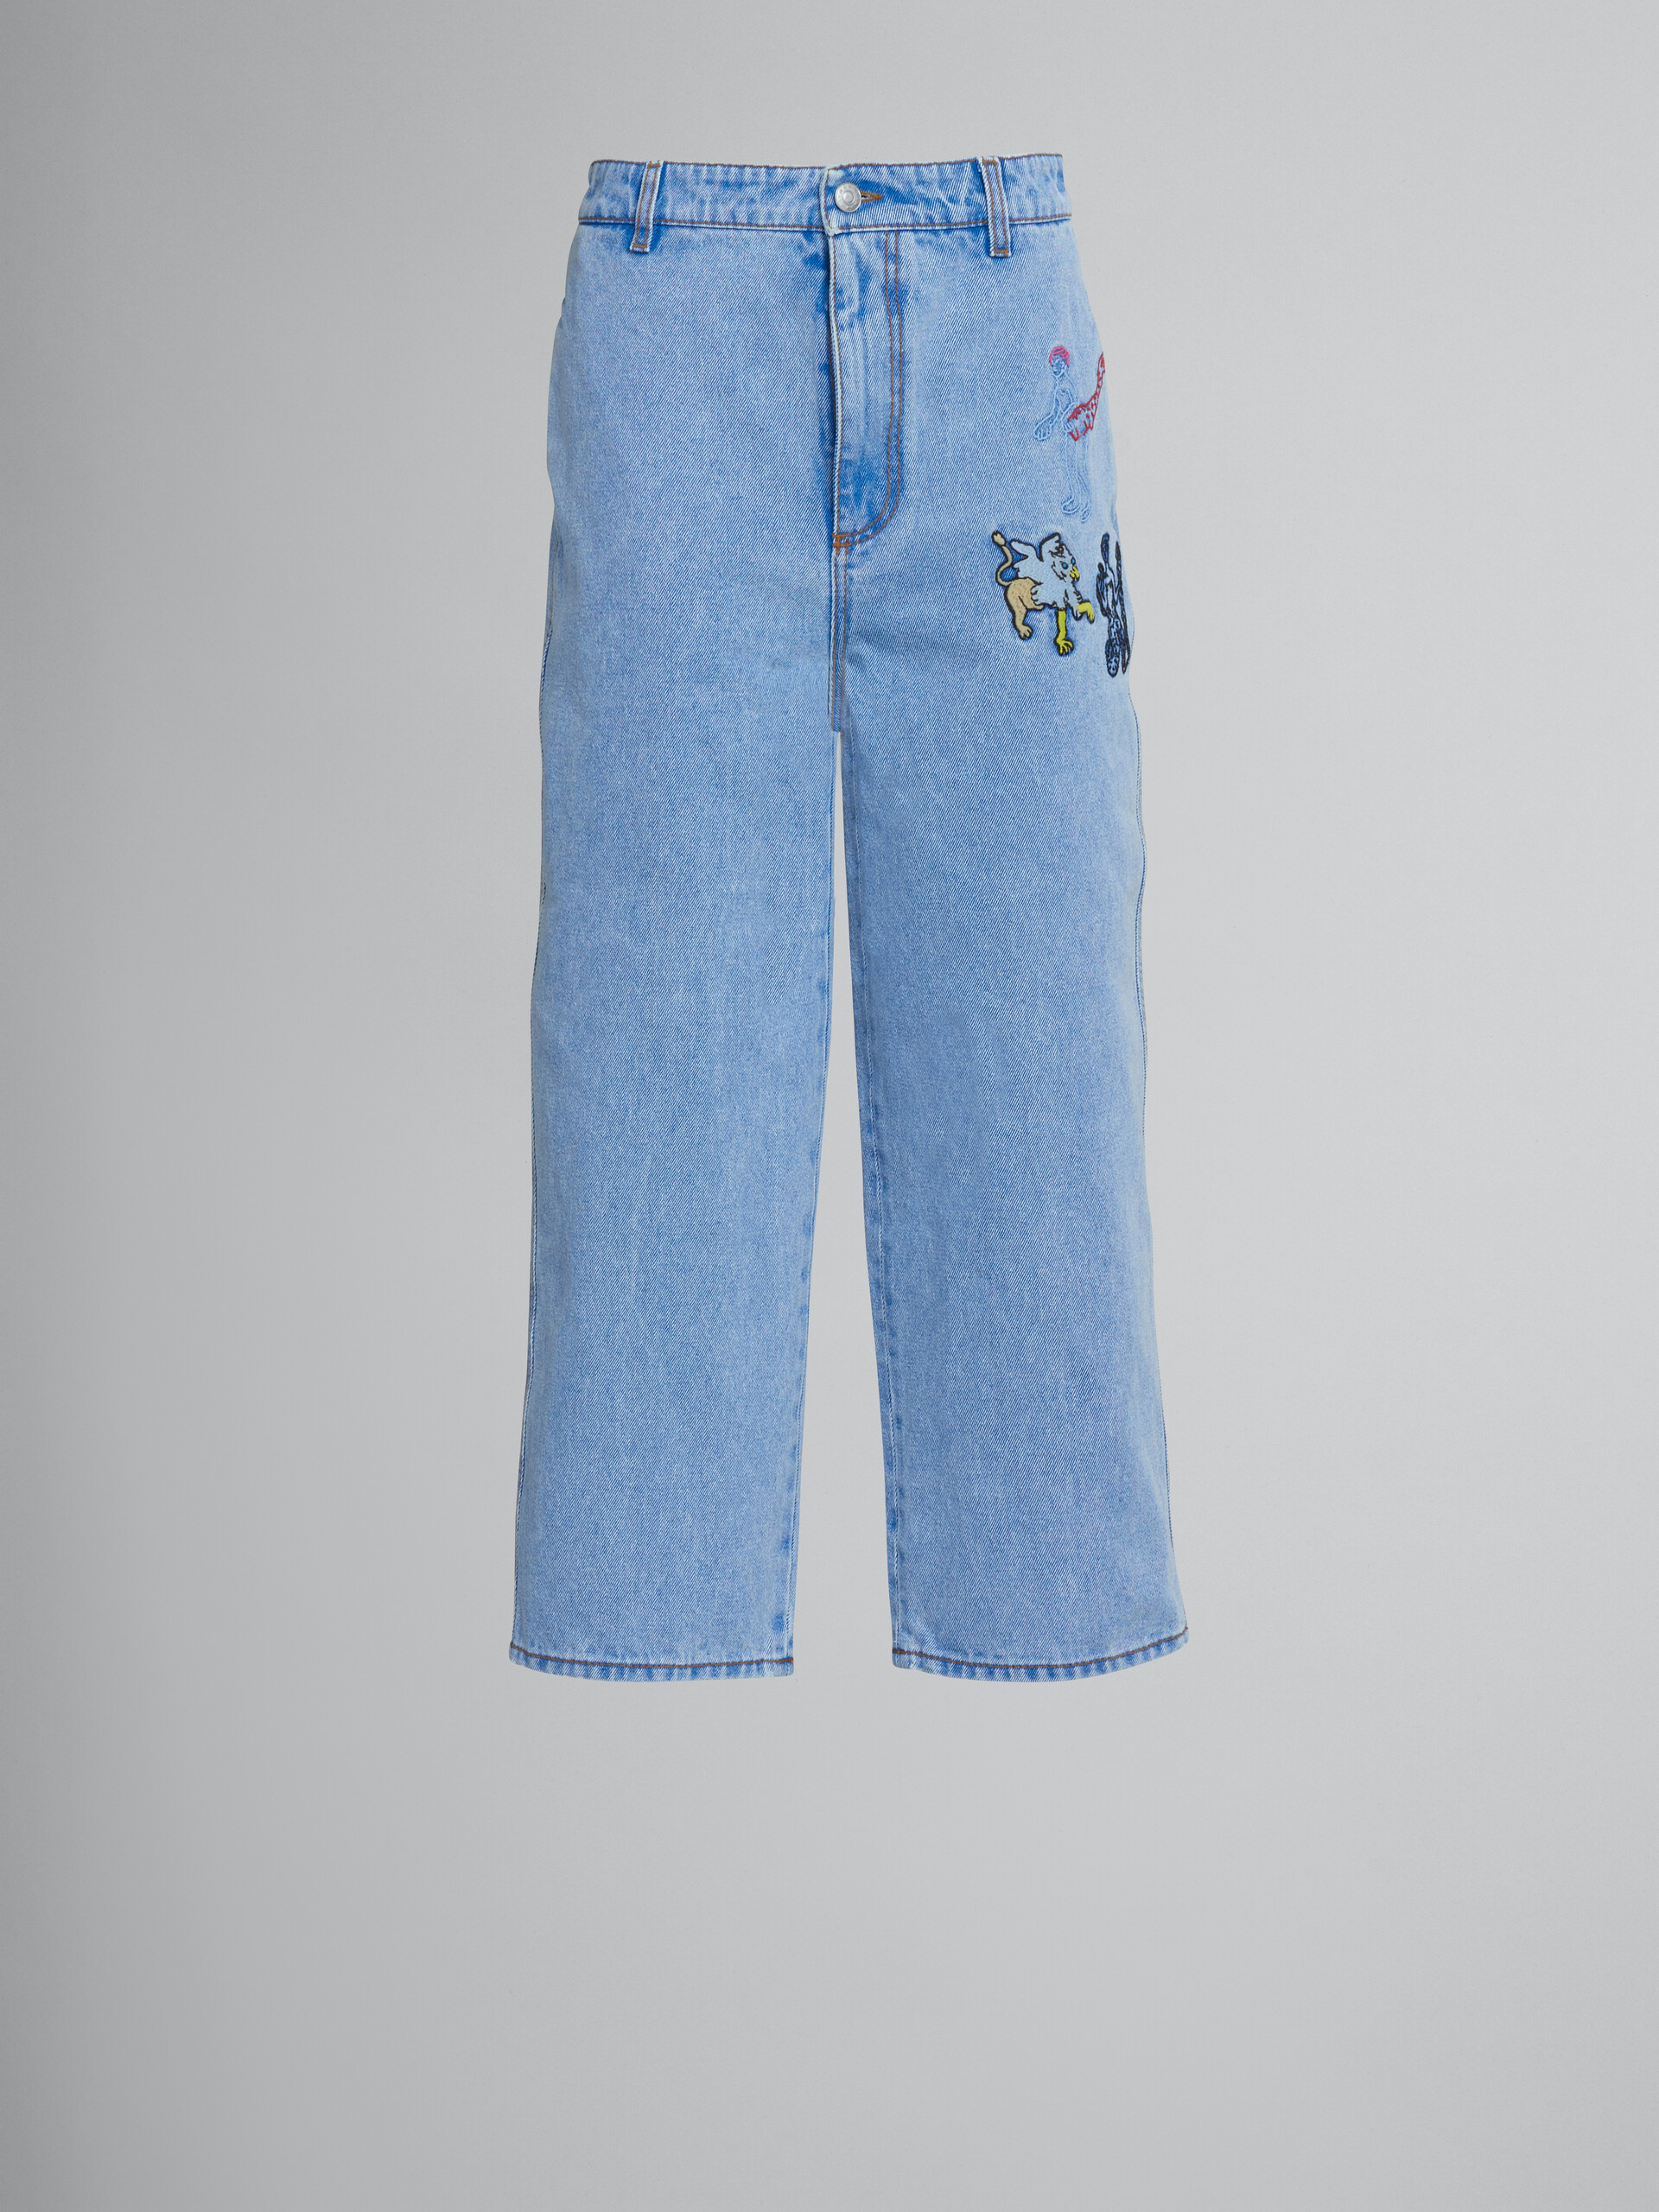 Loose trousers in light blue denim with embroidery - Pants - Image 1